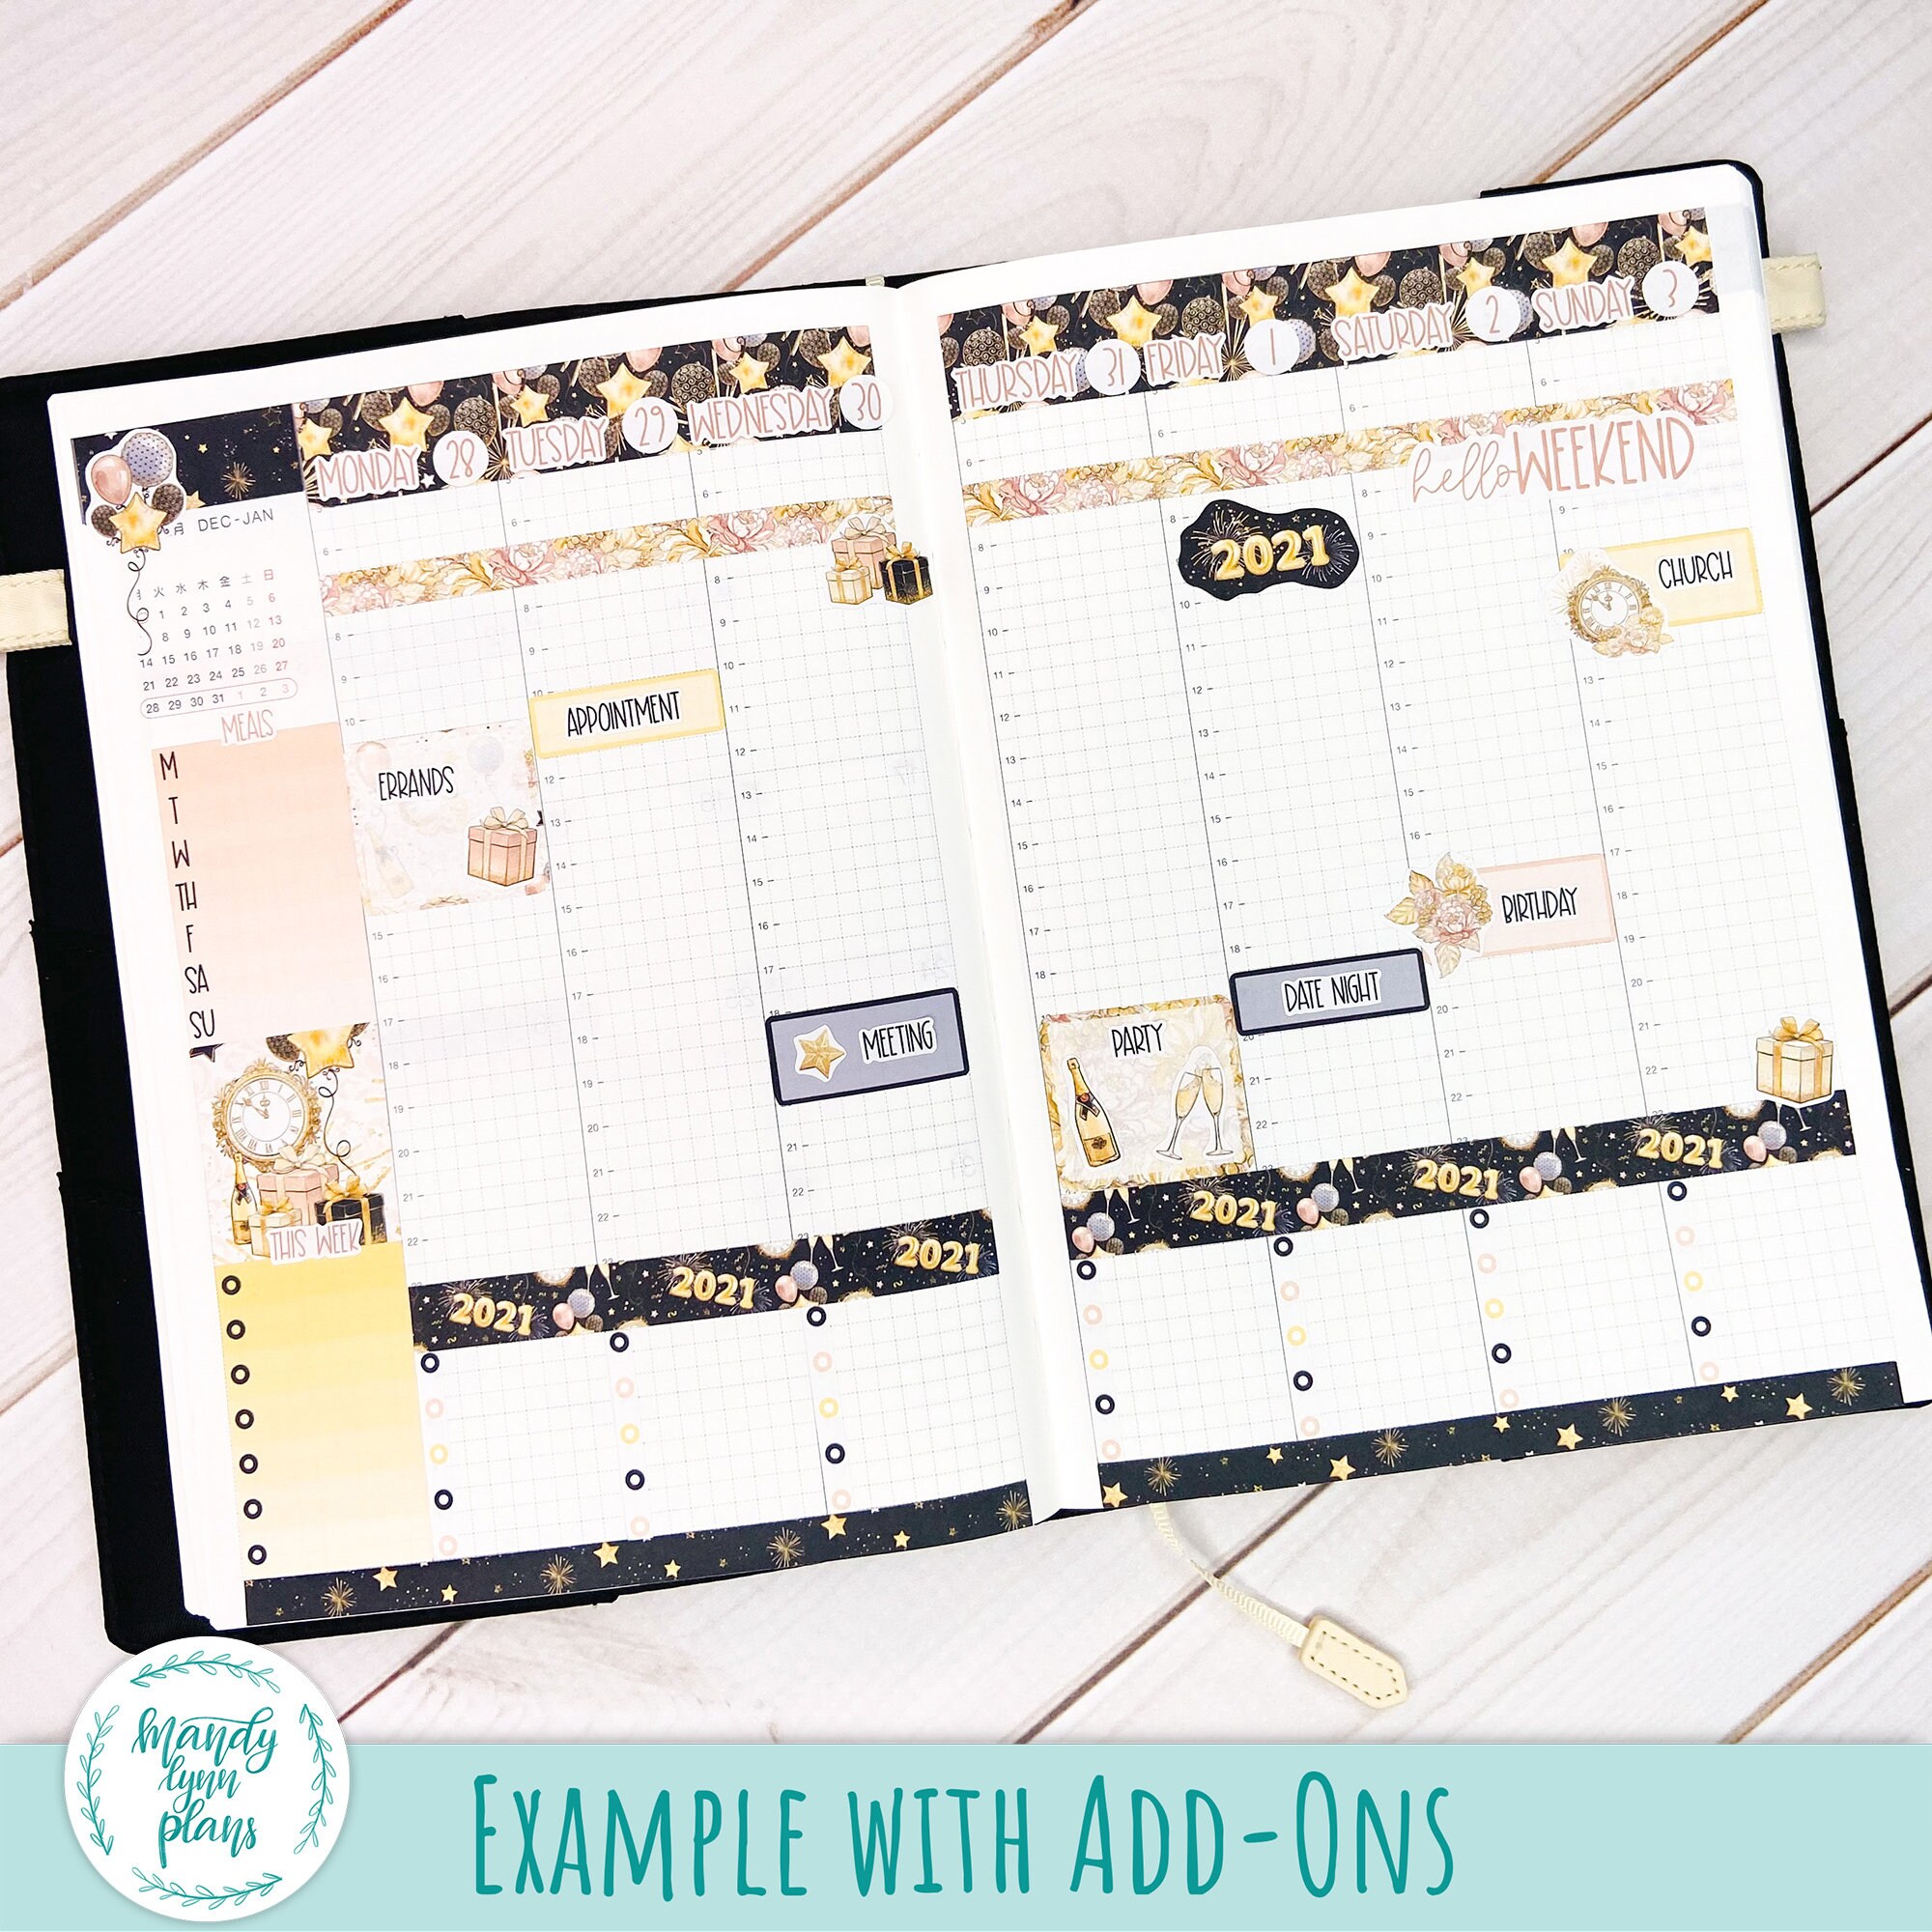 Rosies Tea Hobo Cousin stickers, Magical Tea Shop Planner Sticker Kit,  Weekly Hobonichi Stickers, Weekly Sticker kit, Magic Stickers